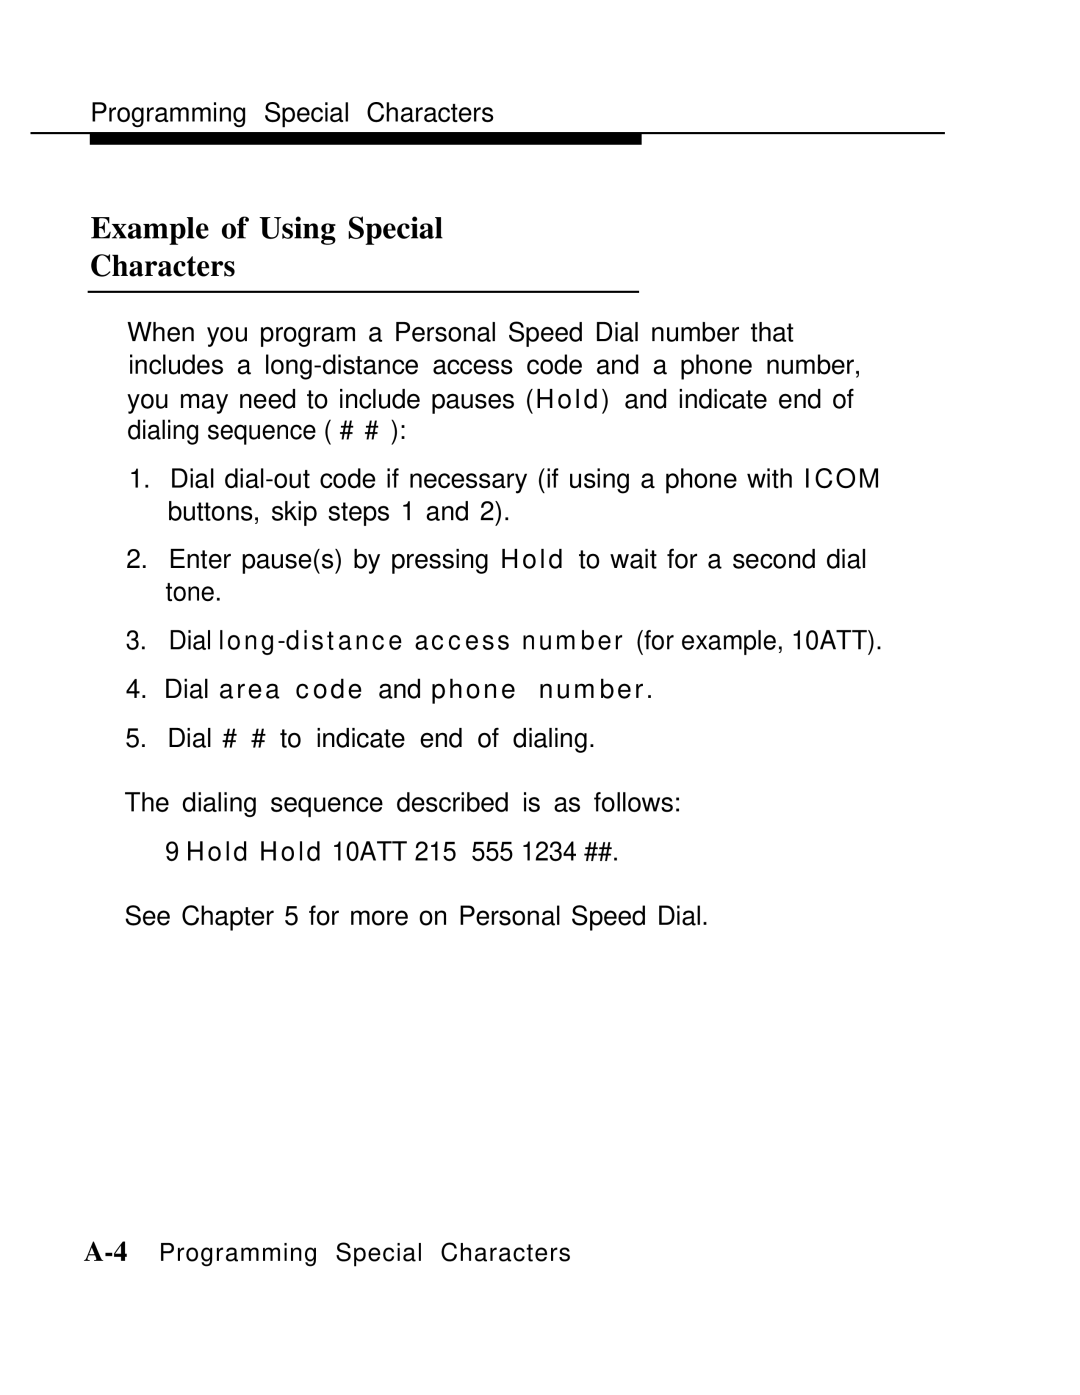 AT&T MLX-10 manual Example of Using Special Characters 